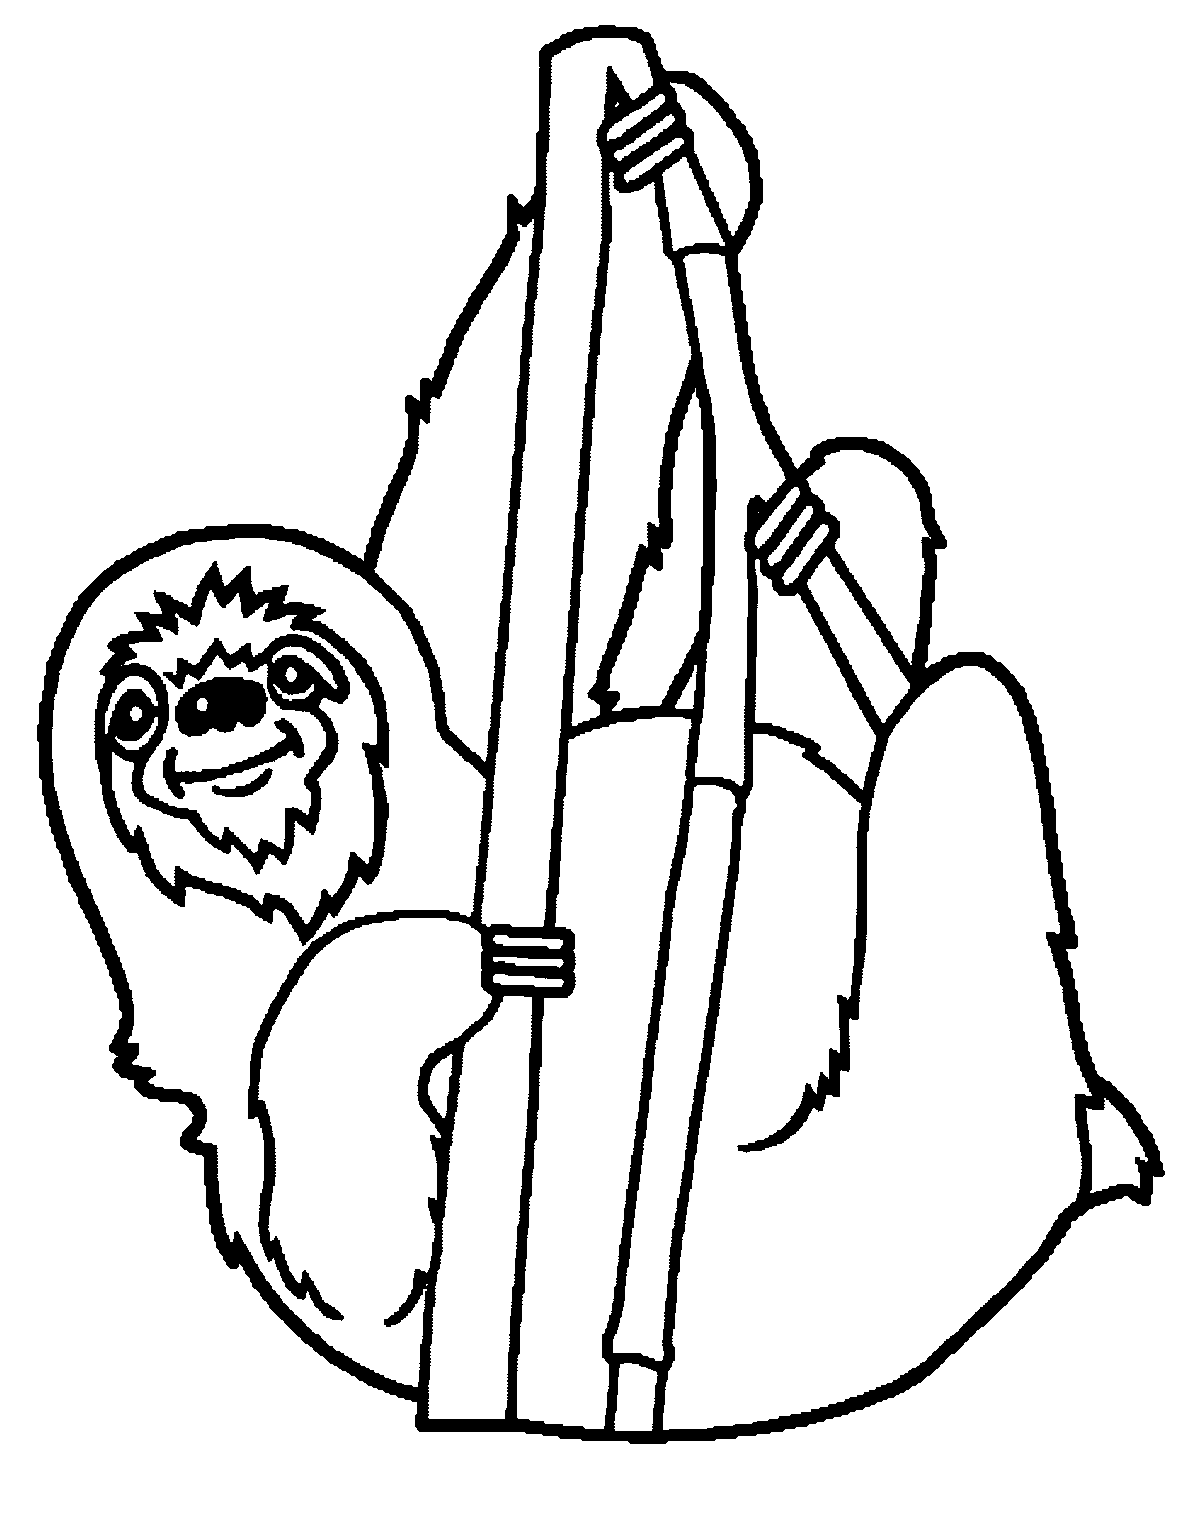 amazon rainforest coloring pages sloth Coloring4free